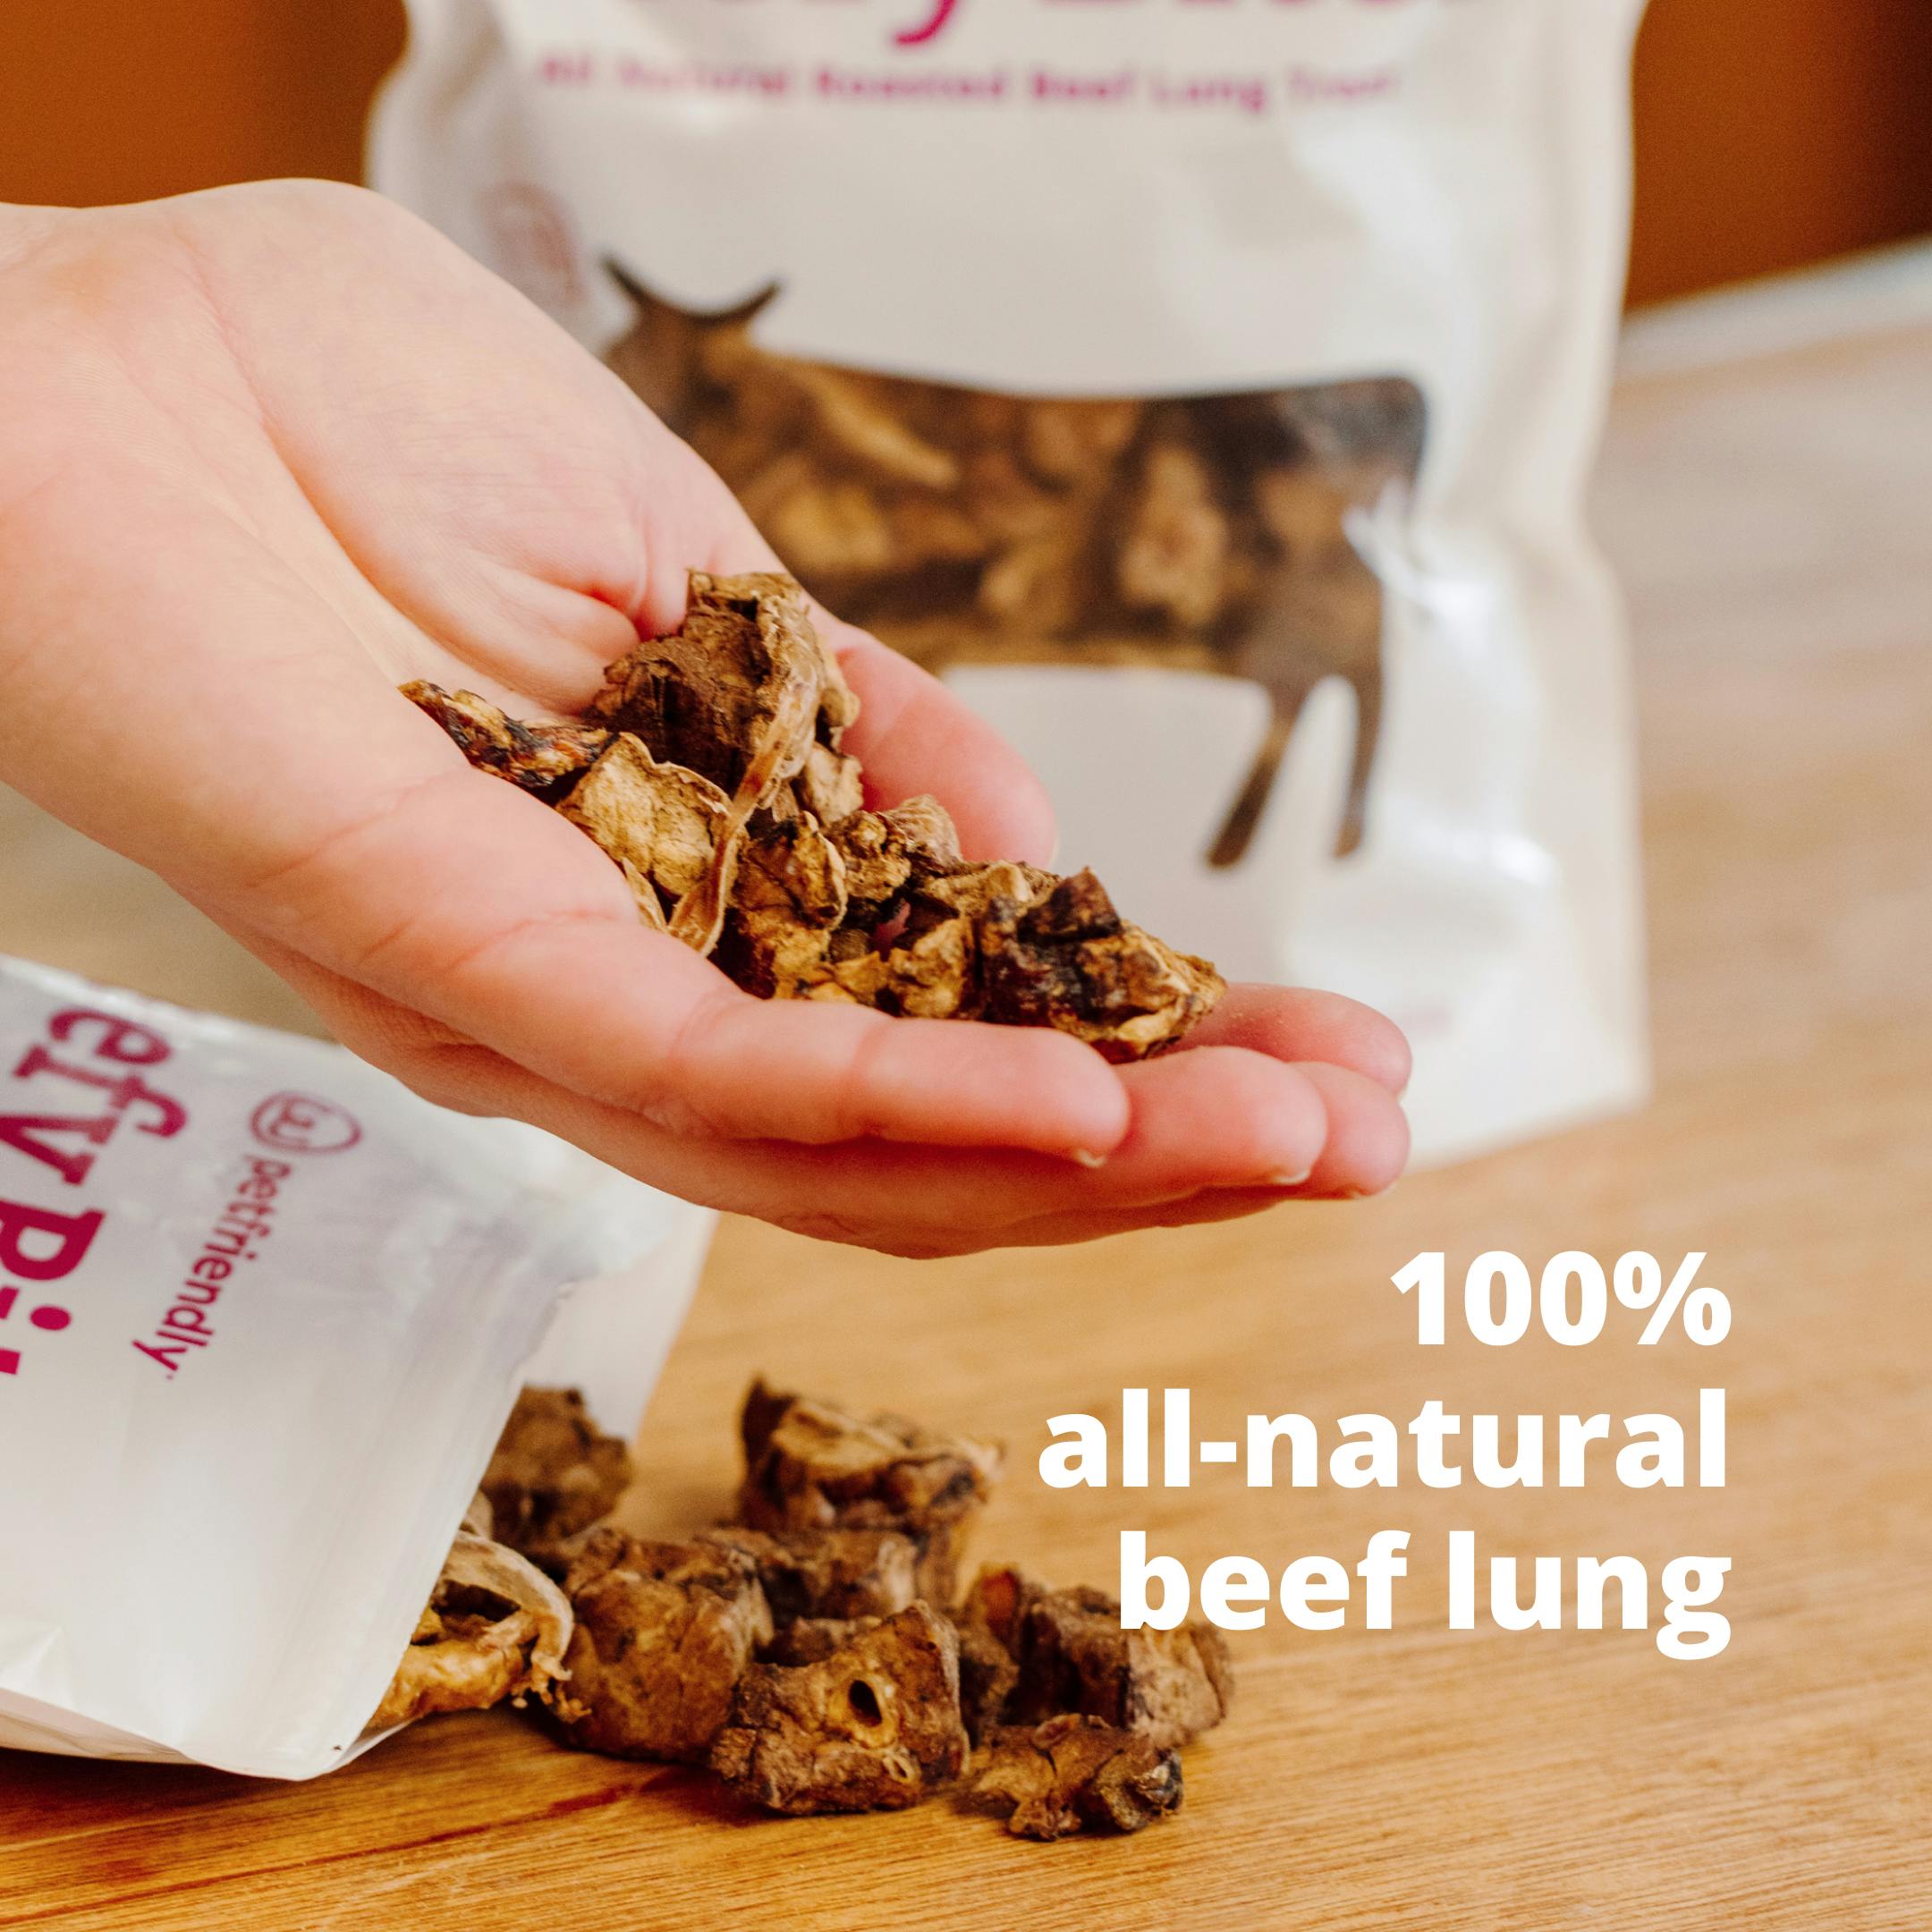 100% all-natural beef lung